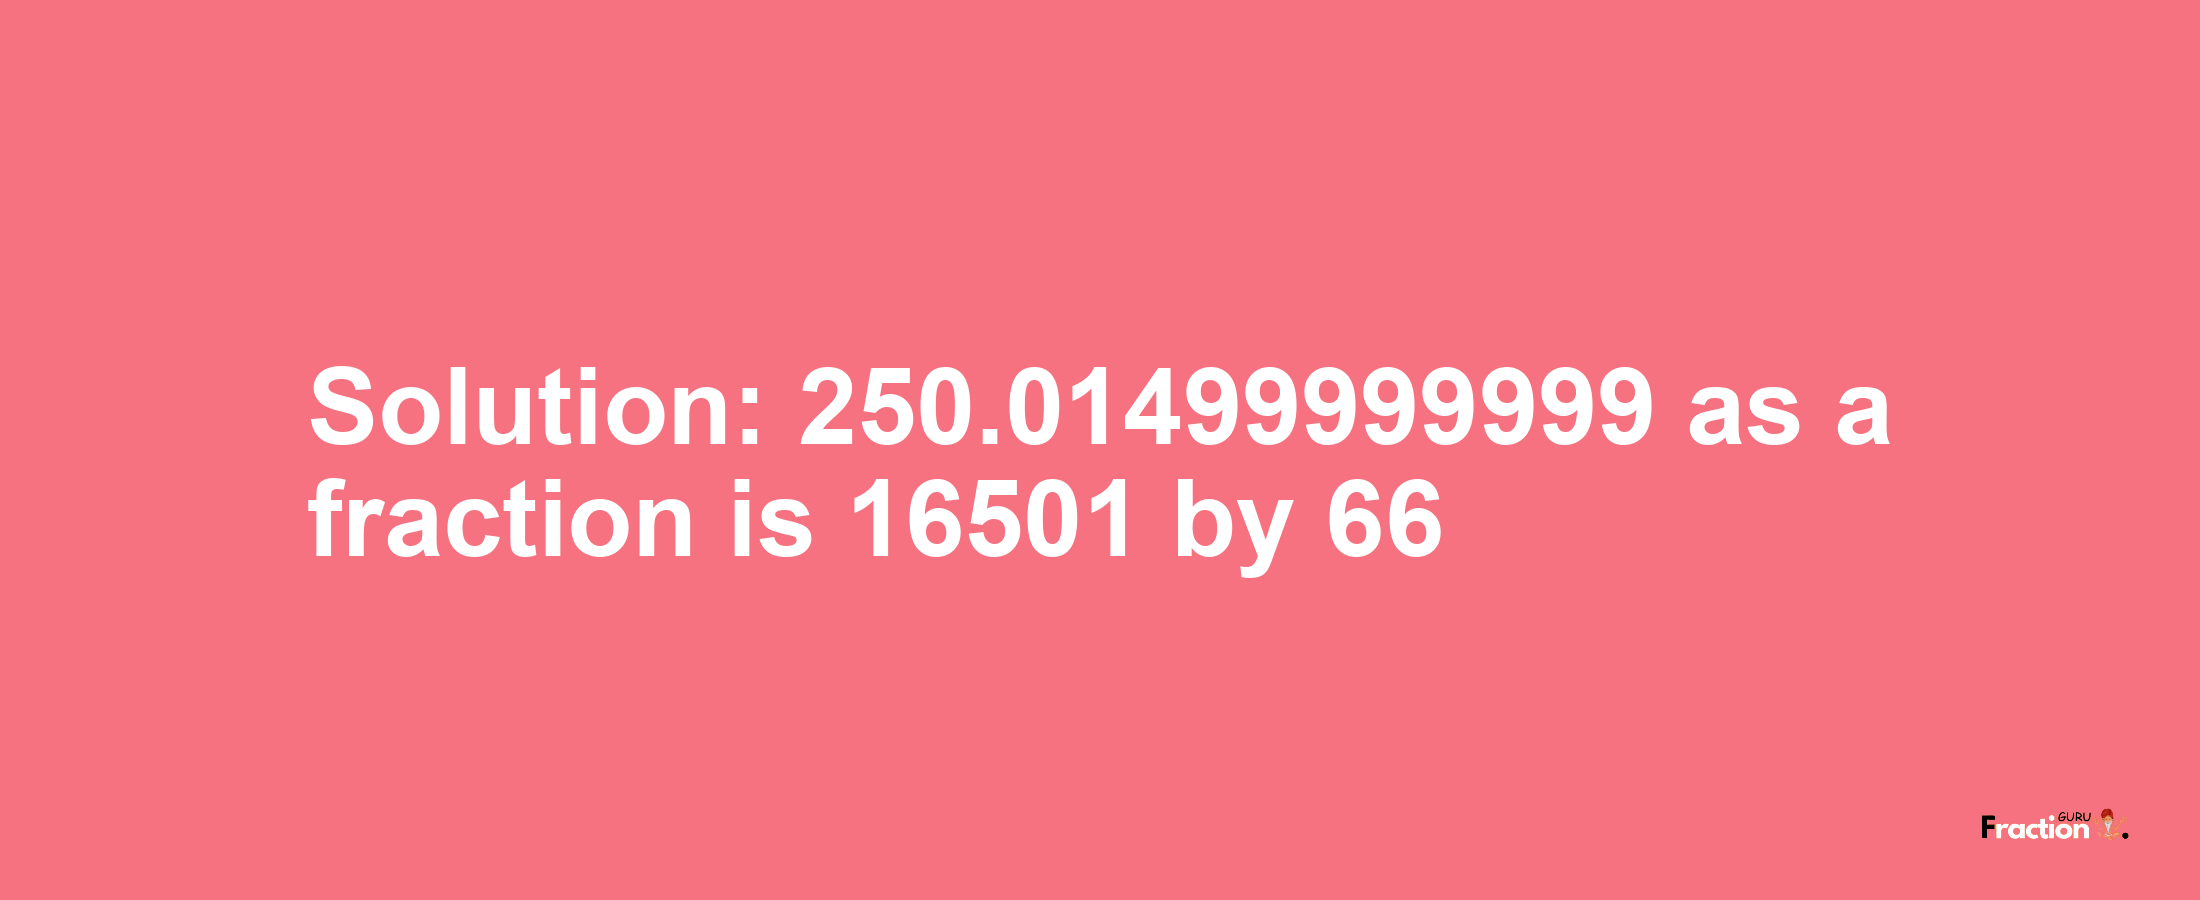 Solution:250.01499999999 as a fraction is 16501/66